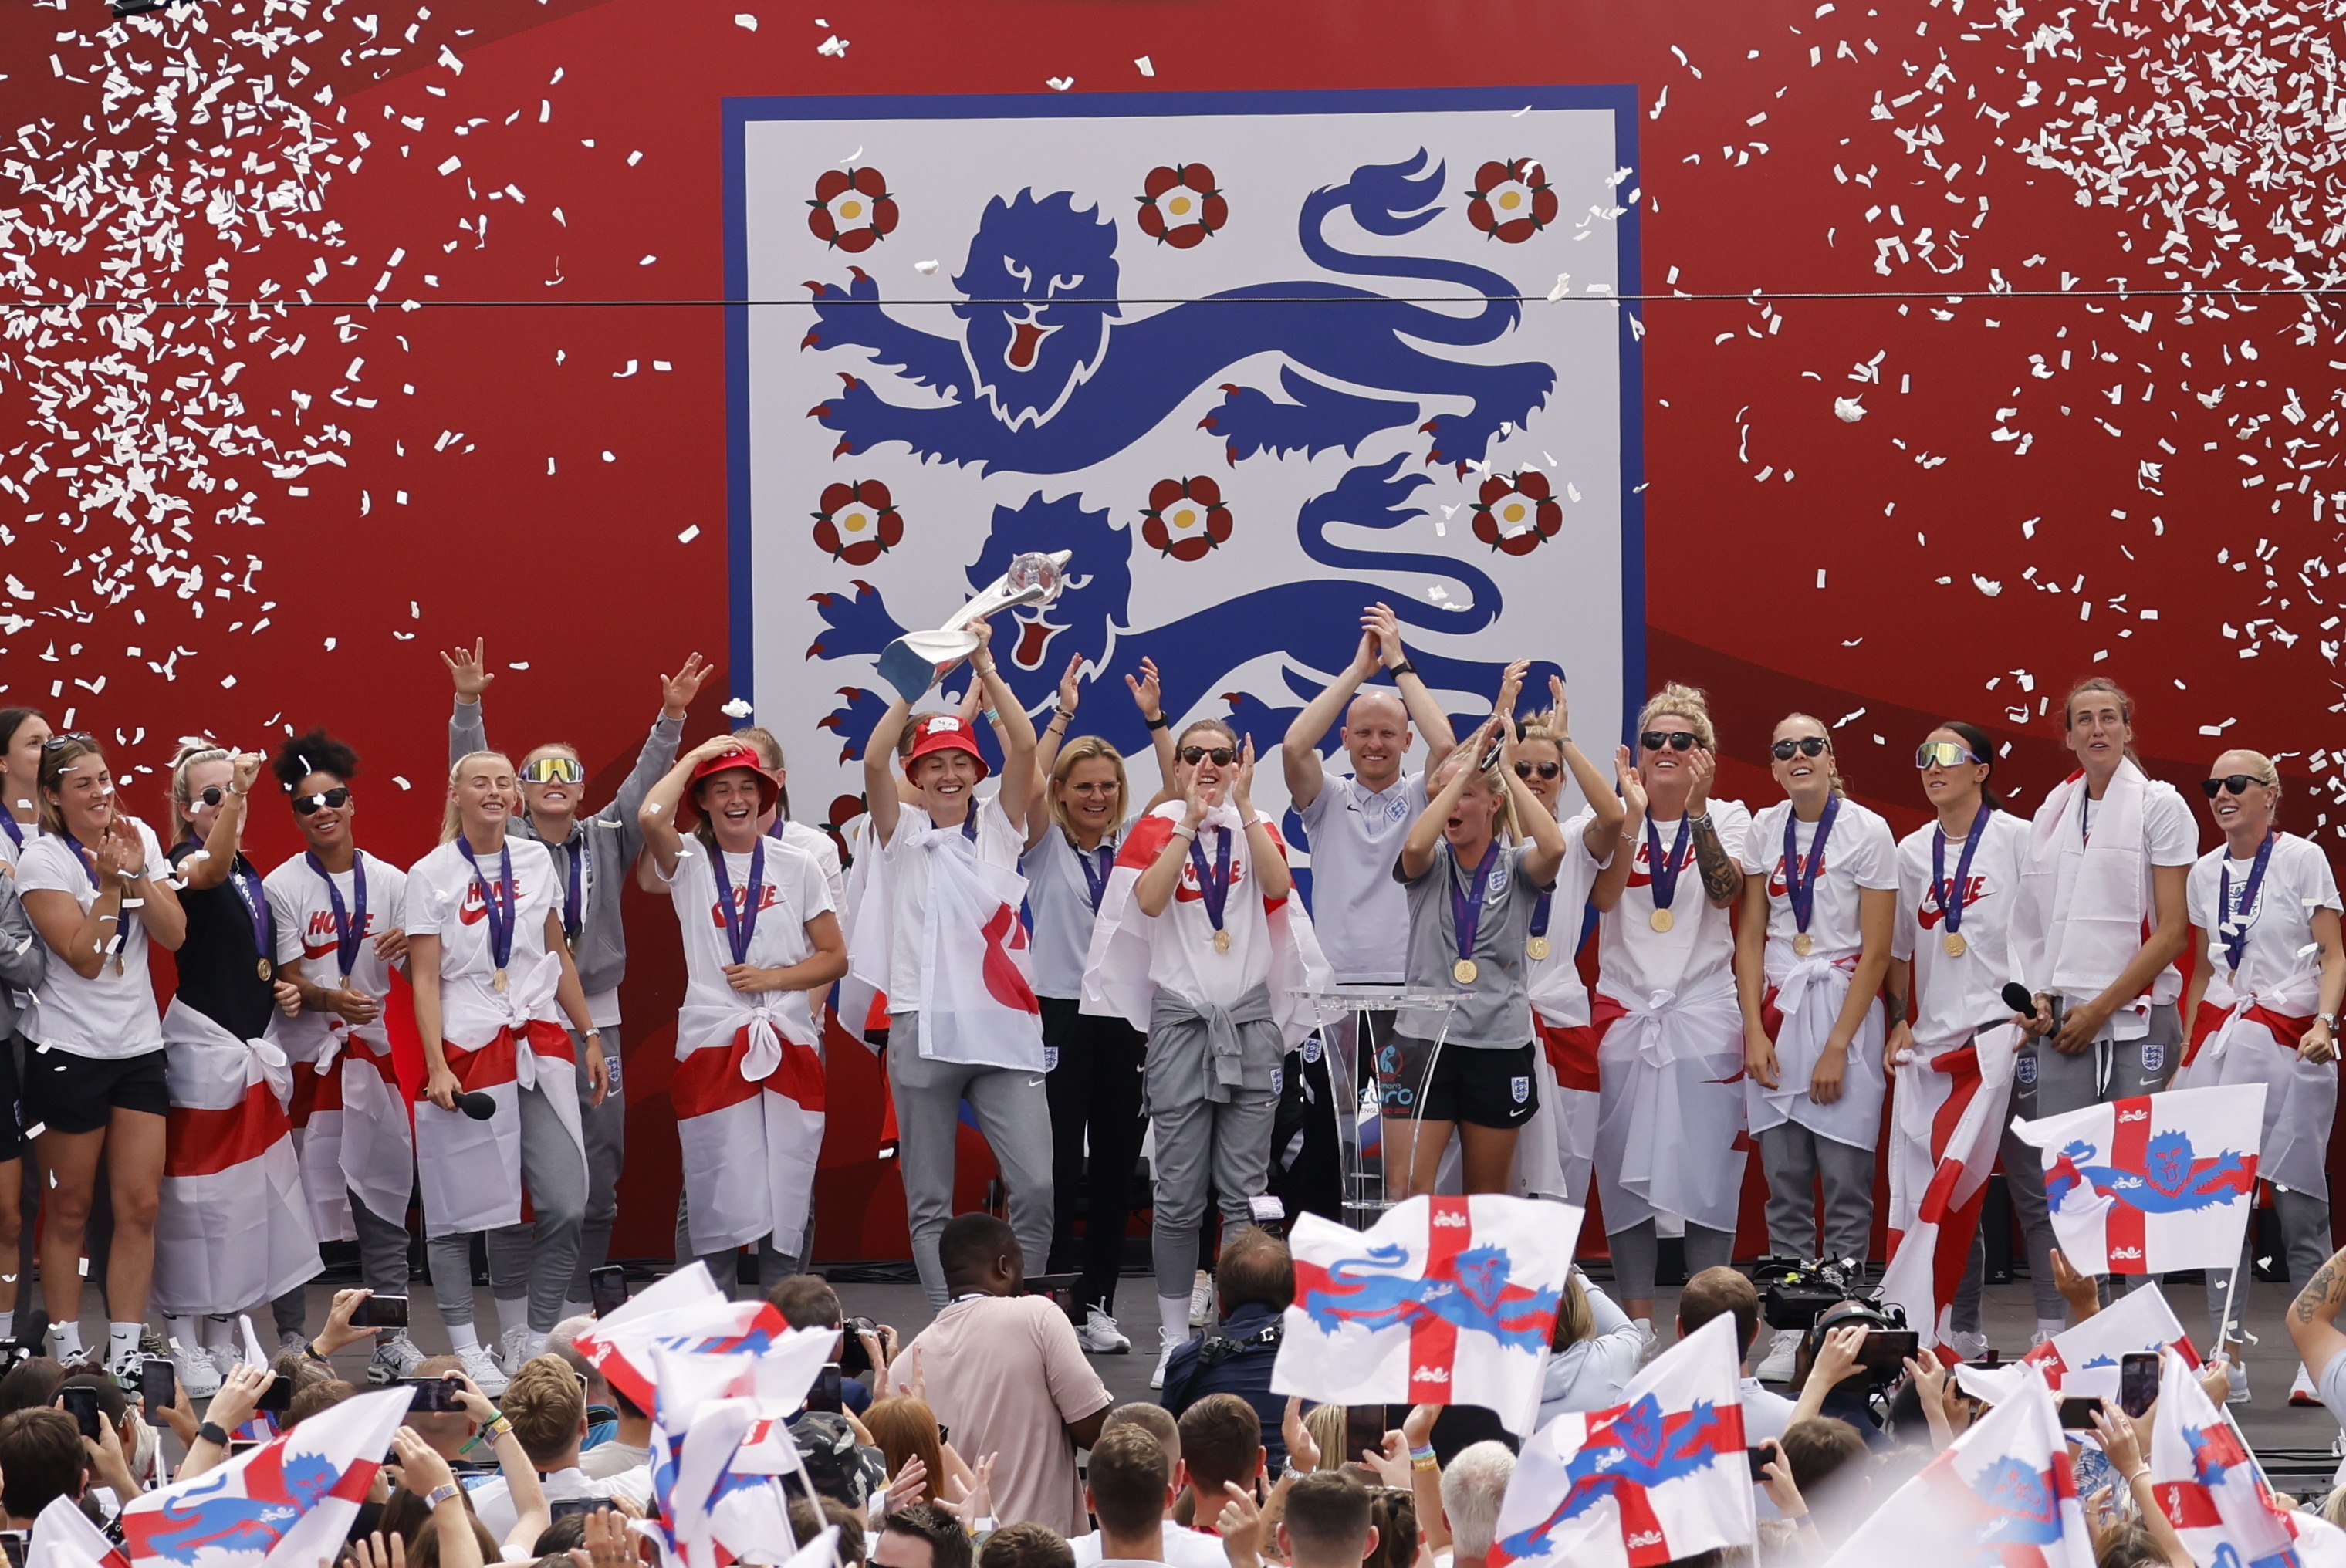 England’s women’s national soccer team celebrate at a fan event in Trafalgar Square, London, on August 1, after winning the UEFA Women’s Euro 2022. Photo: EPA-EFE 